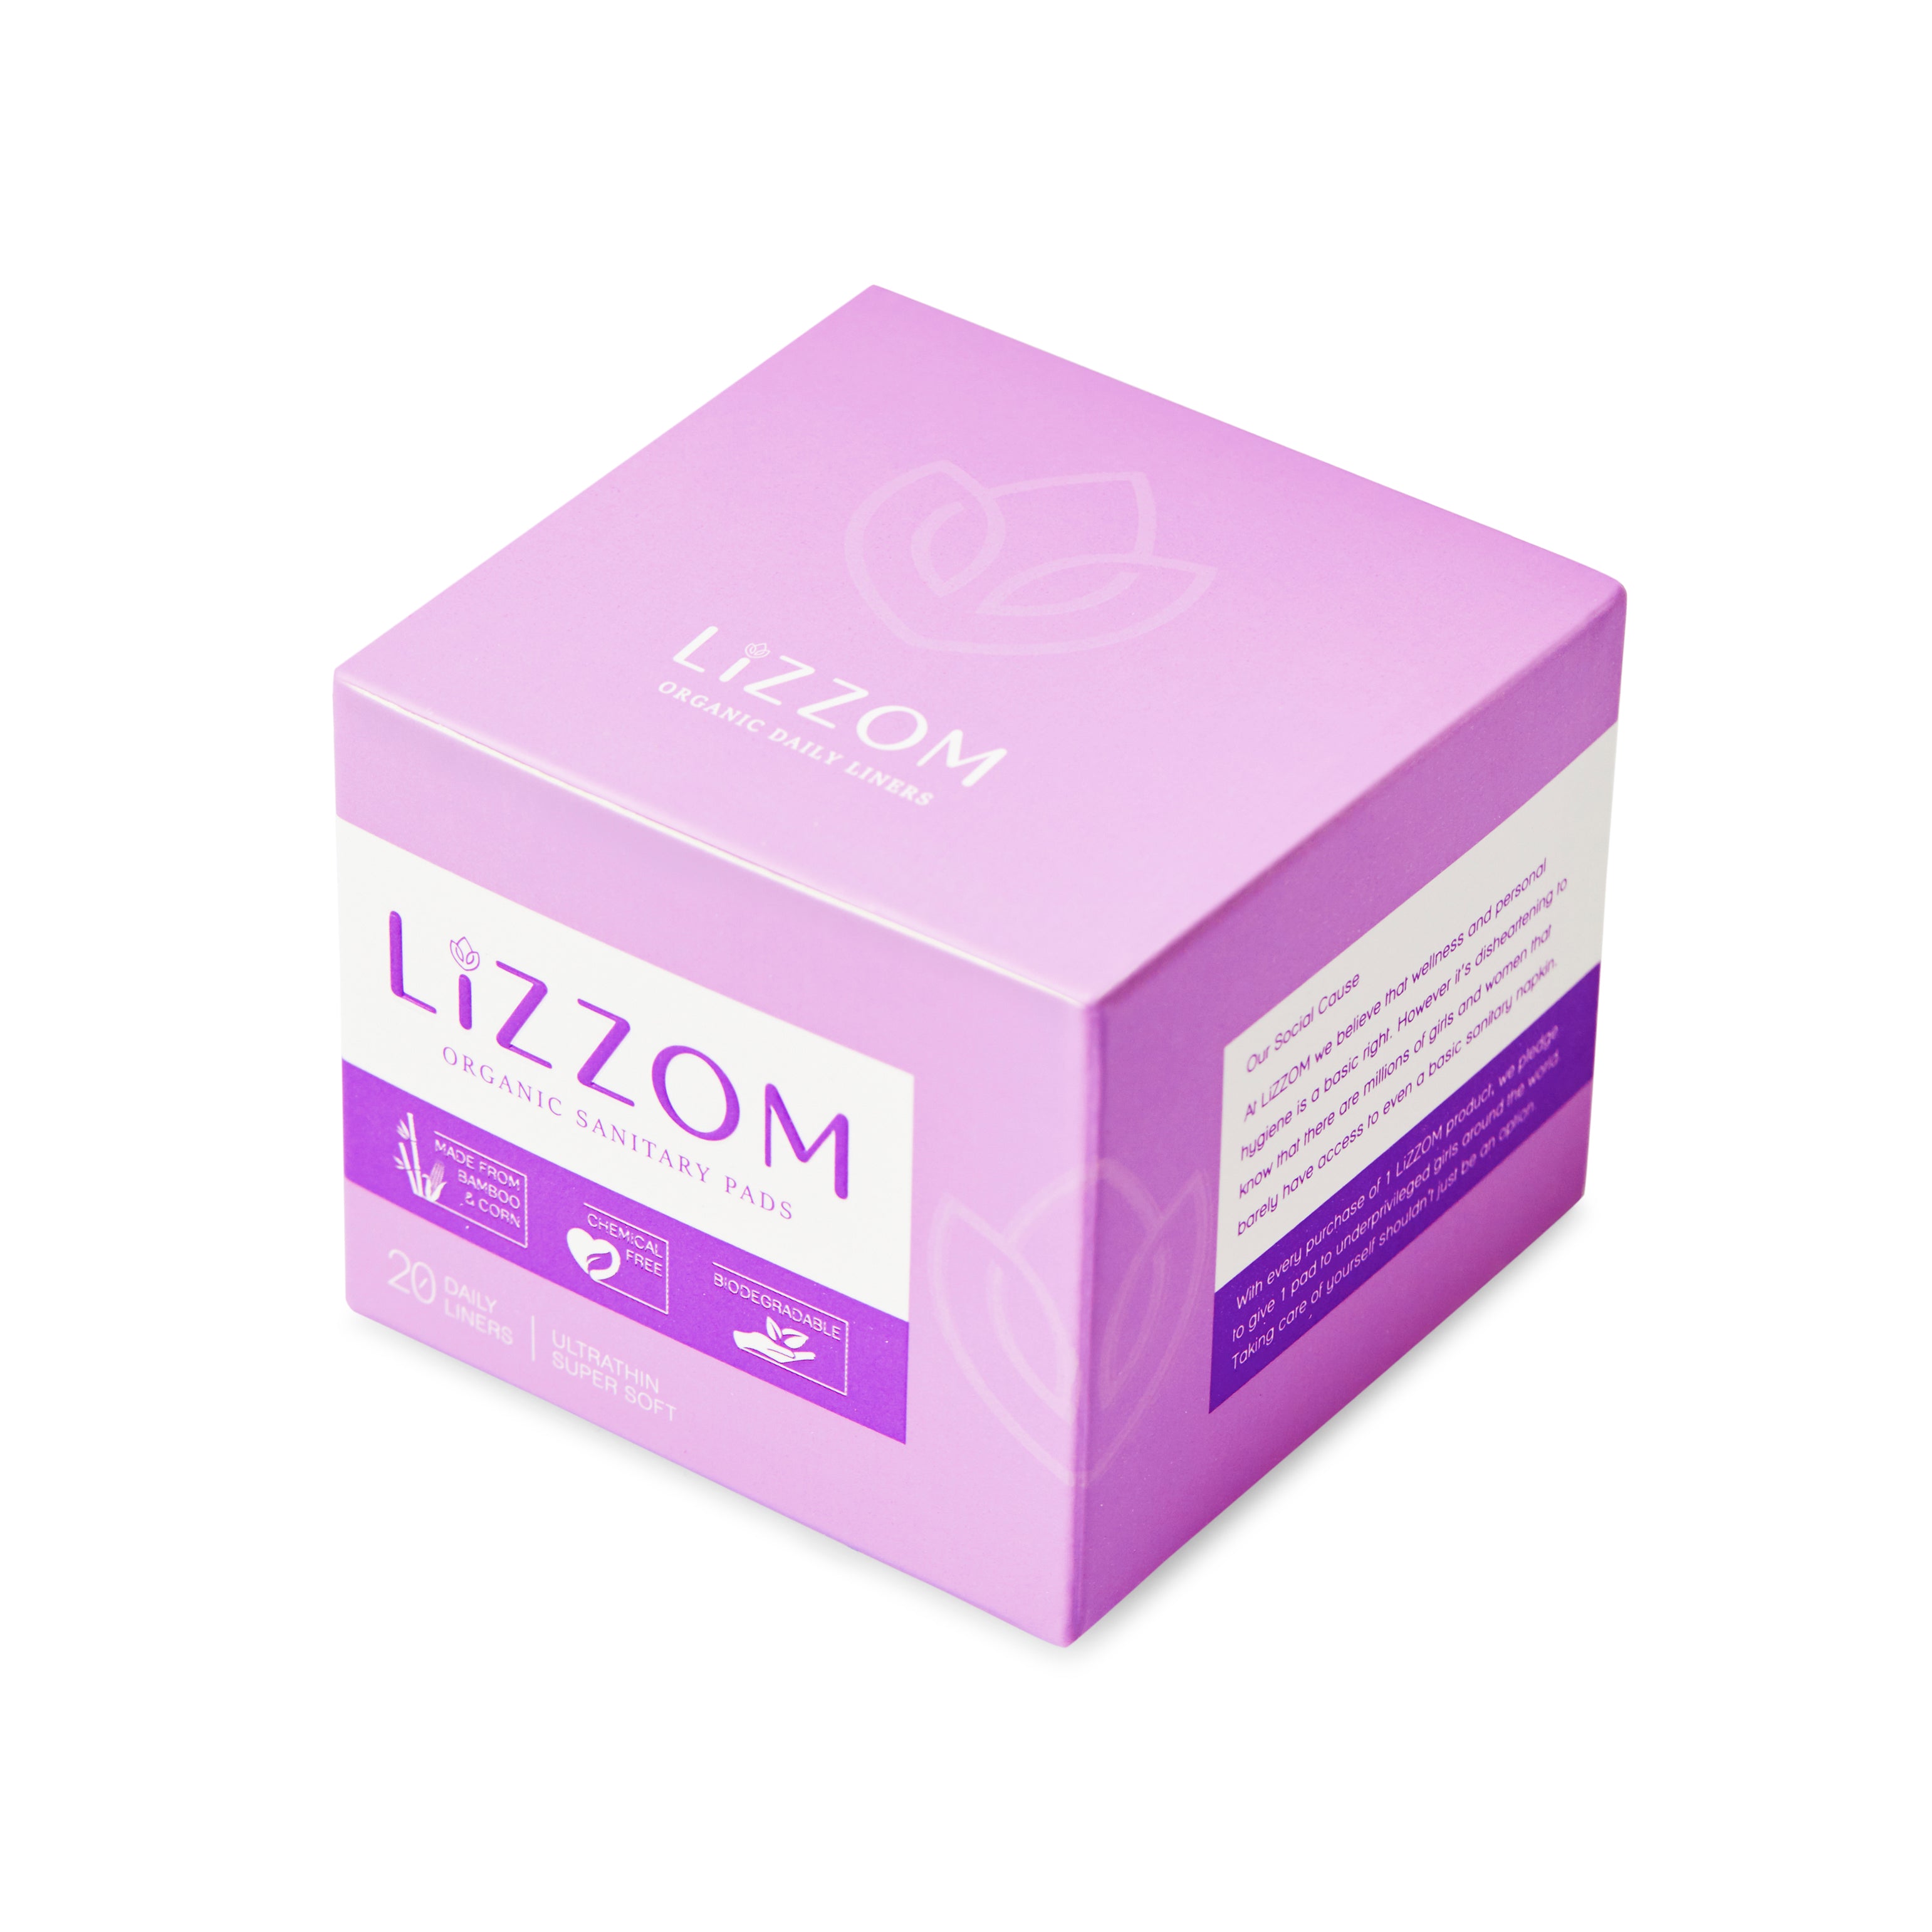 LiZZOM Organic Daily liners - Pack of 2 (40 Liners)